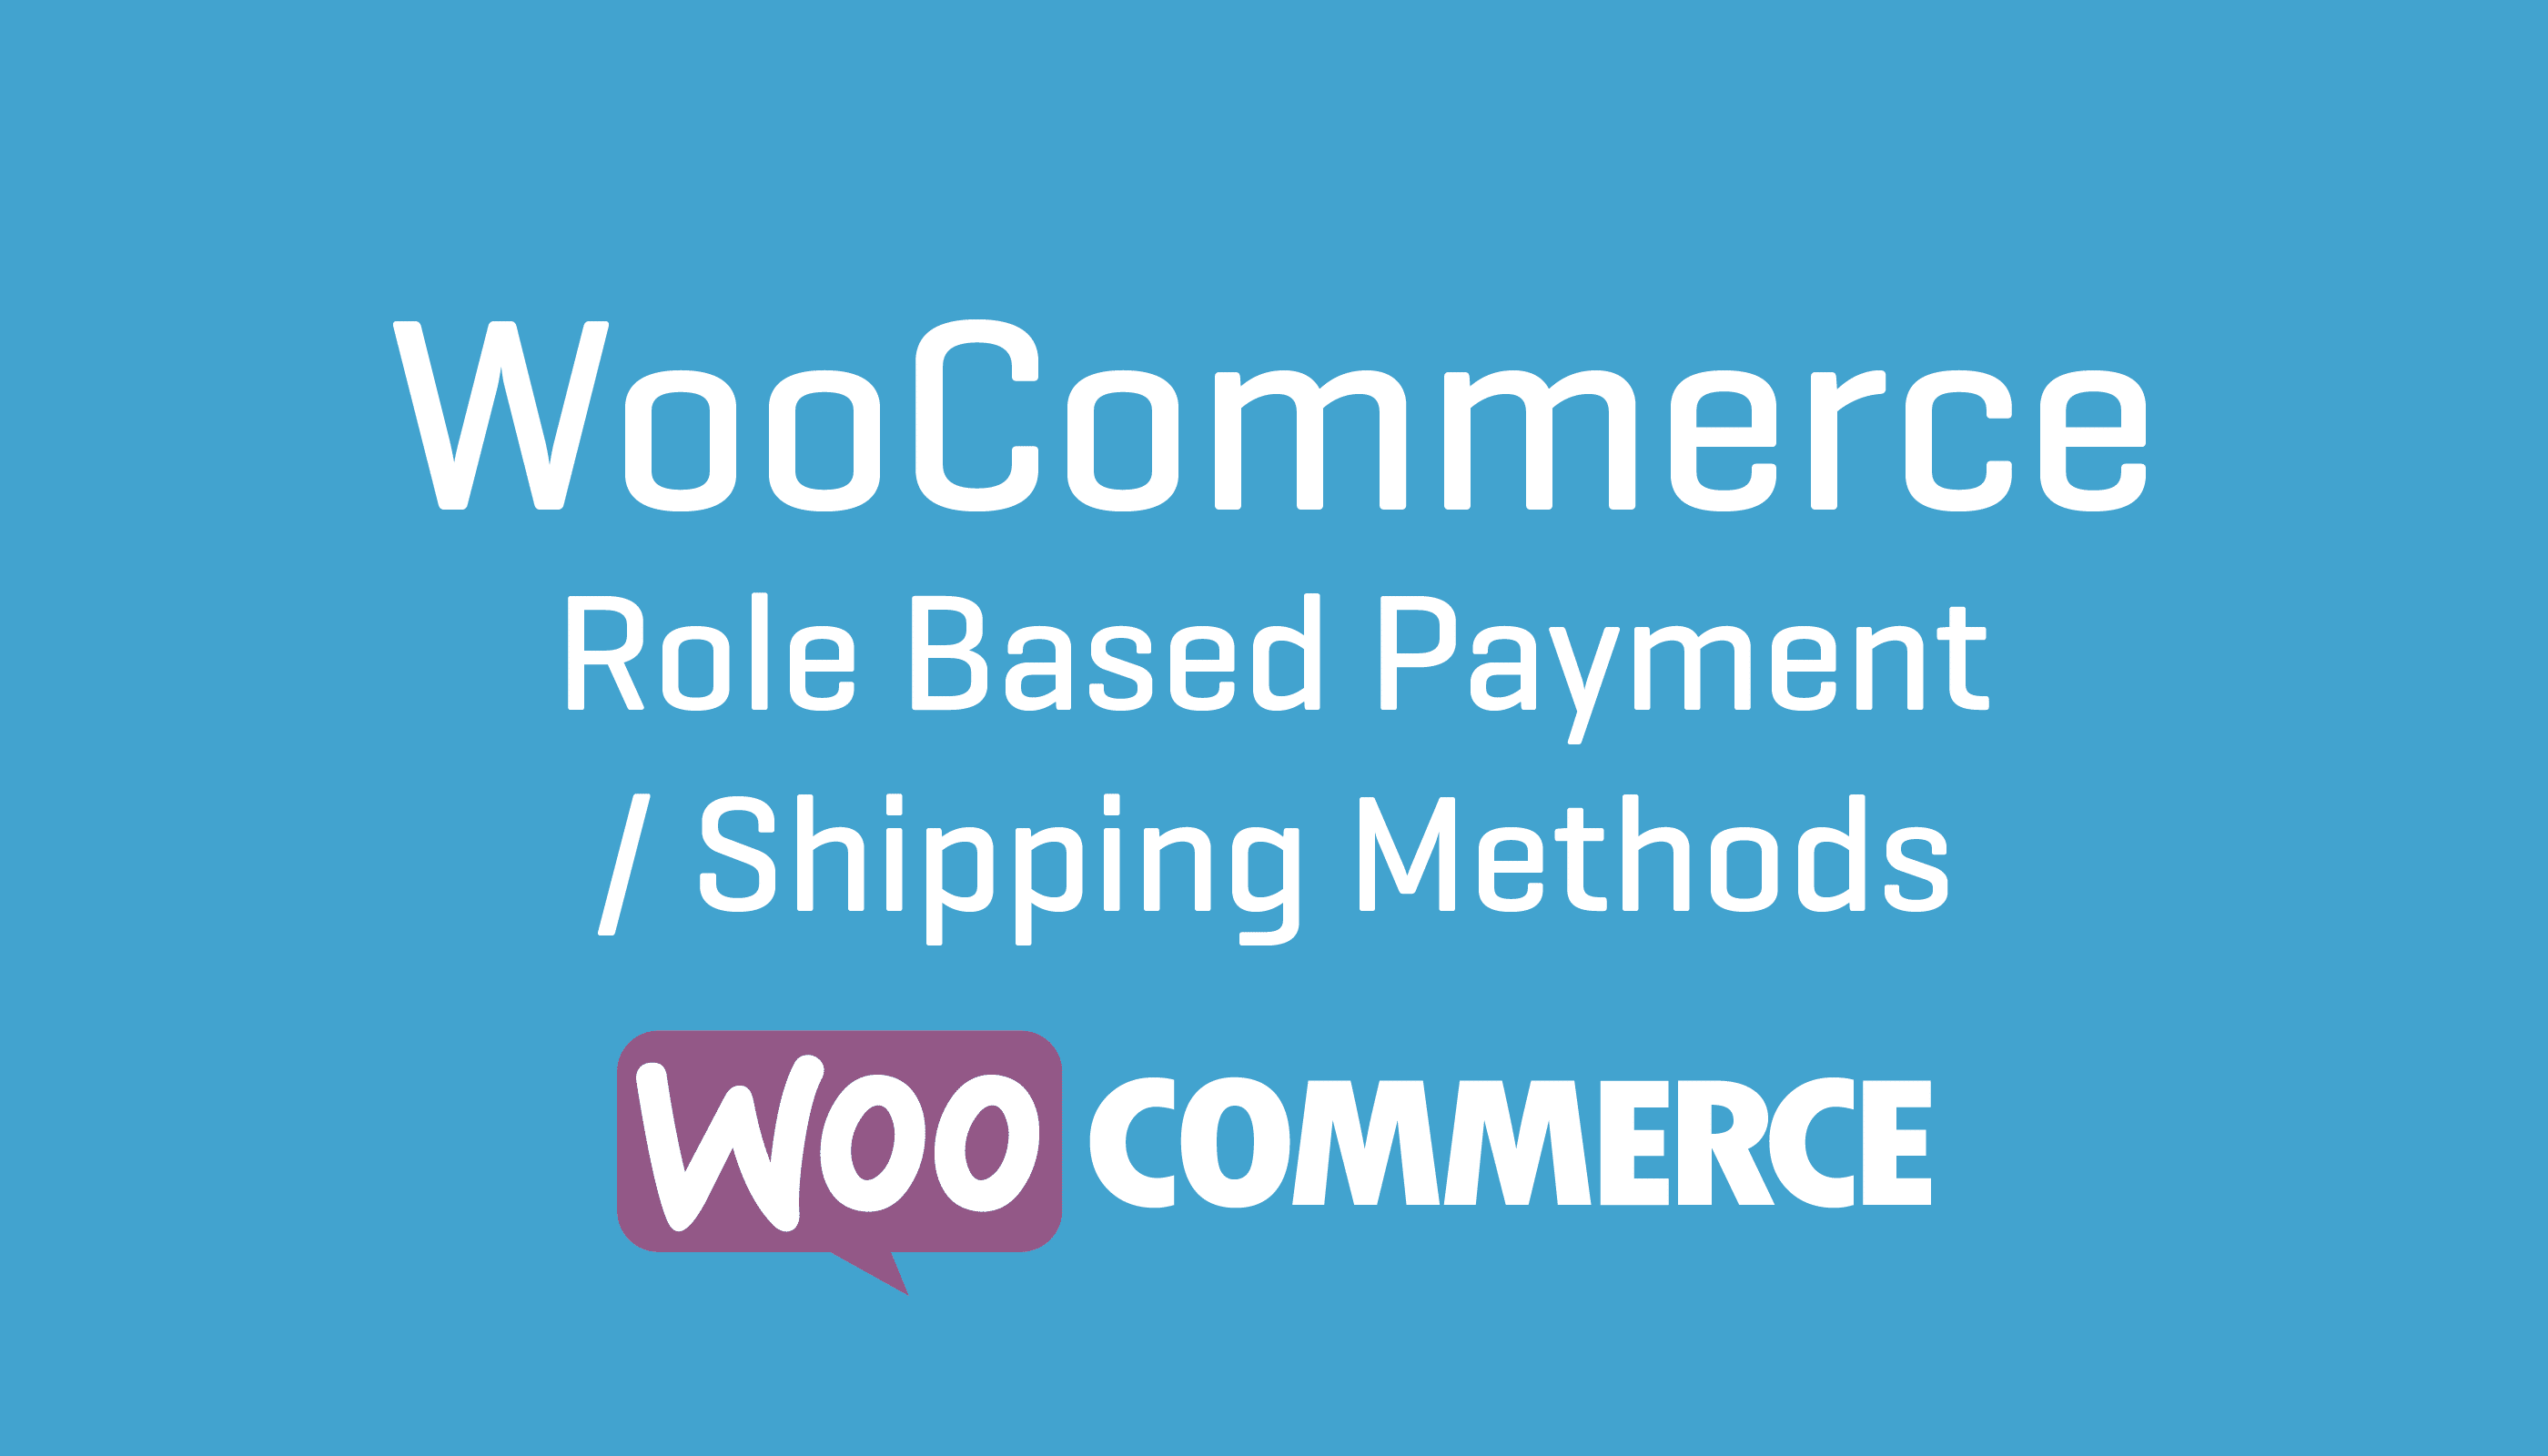 WooCommerce WooCommerce Role Based Payment : Shipping Methods